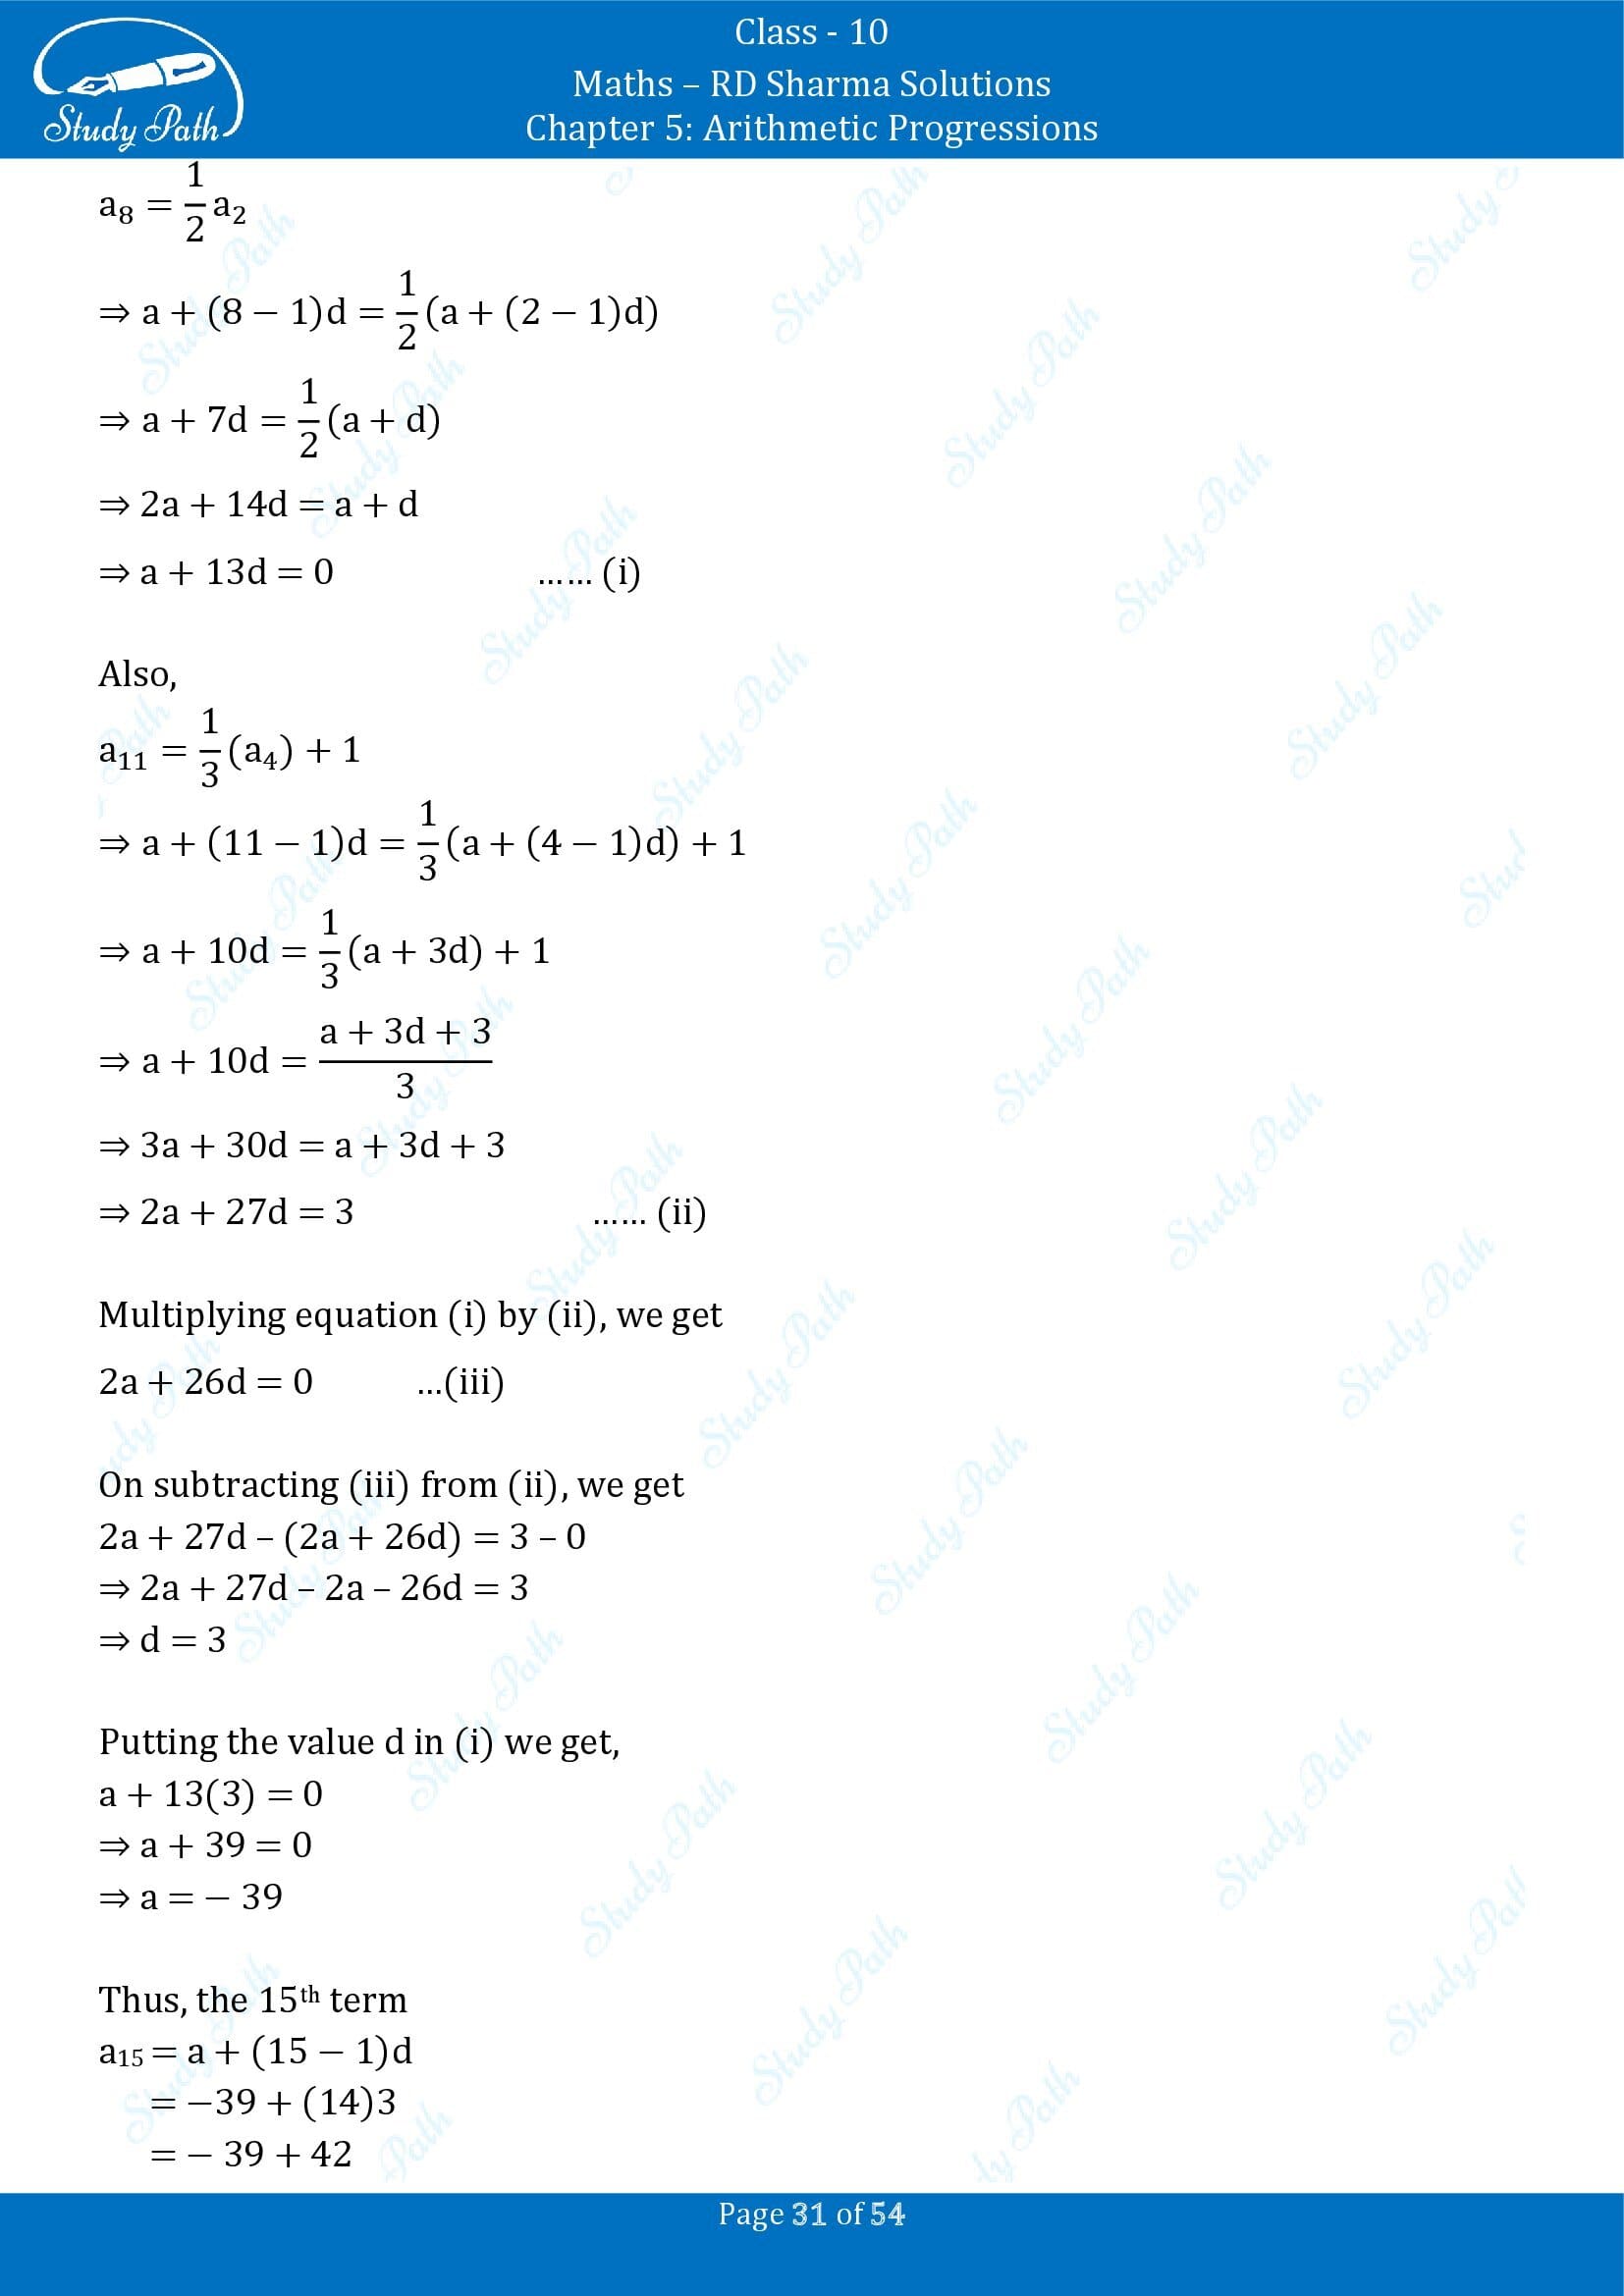 RD Sharma Solutions Class 10 Chapter 5 Arithmetic Progressions Exercise 5.4 00031